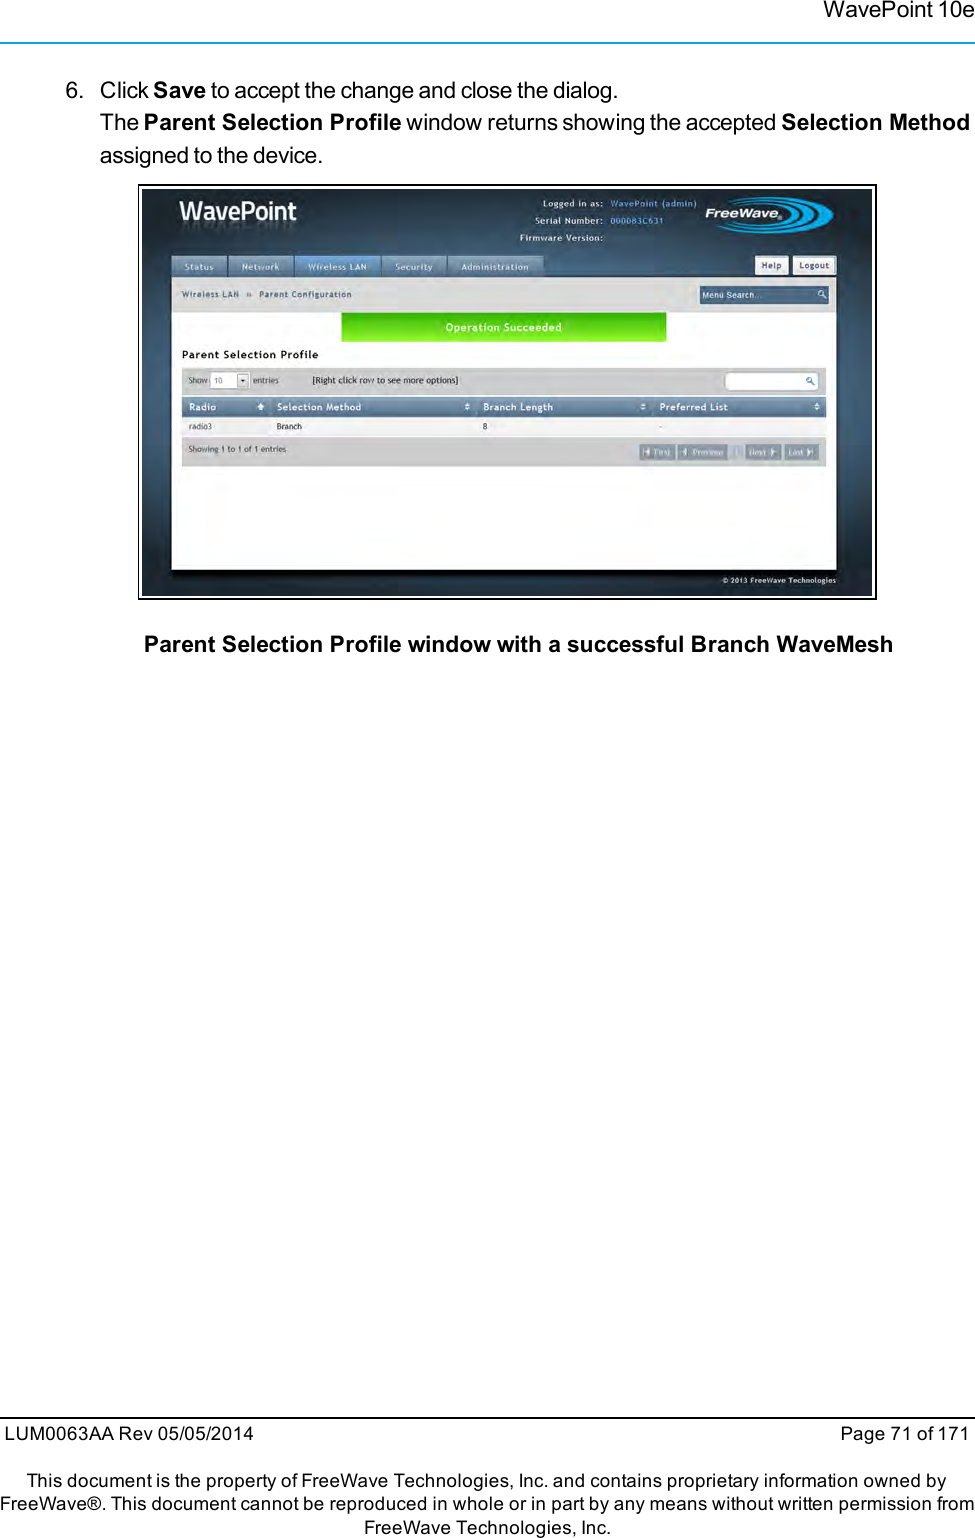 WavePoint 10e6. Click Save to accept the change and close the dialog.The Parent Selection Profile window returns showing the accepted Selection Methodassigned to the device.Parent Selection Profile window with a successful Branch WaveMeshLUM0063AA Rev 05/05/2014 Page 71 of 171This document is the property of FreeWave Technologies, Inc. and contains proprietary information owned byFreeWave®. This document cannot be reproduced in whole or in part by any means without written permission fromFreeWave Technologies, Inc.